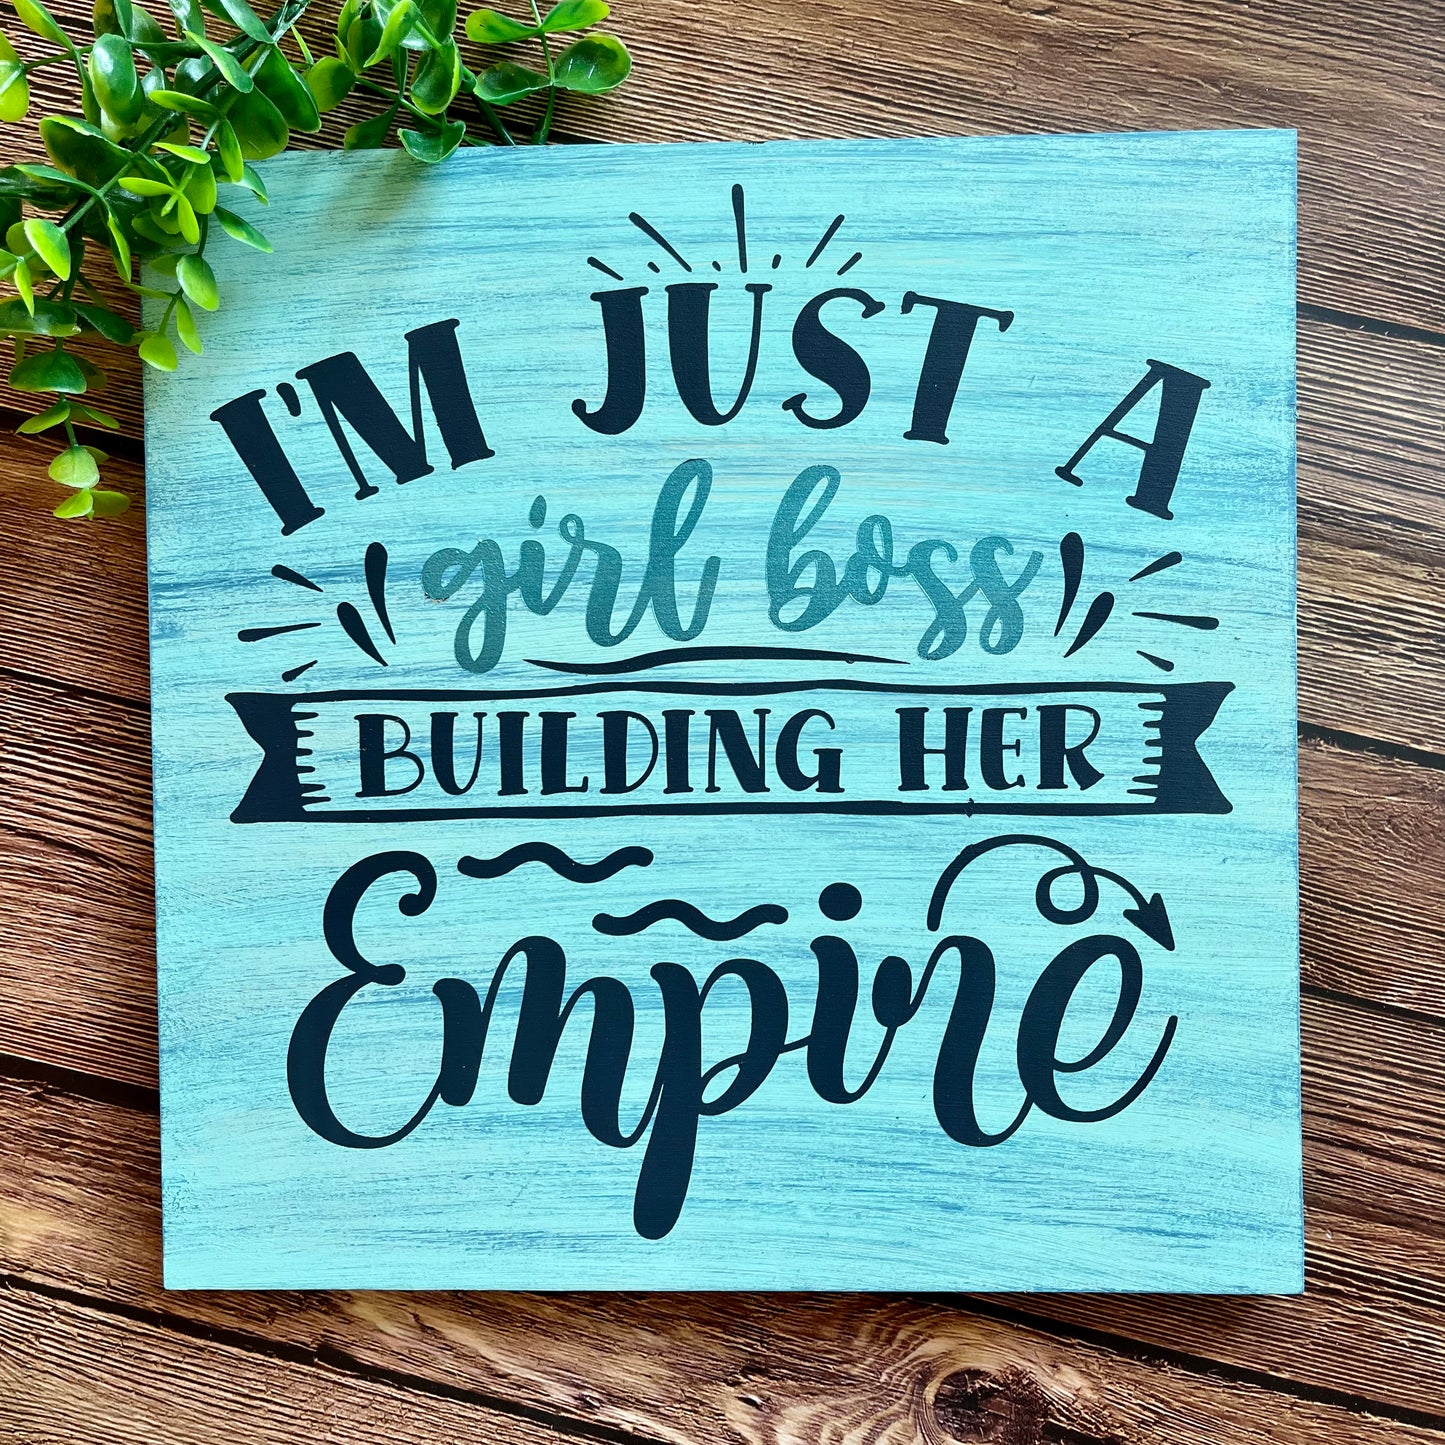 I'm Just a Girl Boss Building her Empire: SQUARE DESIGN - Paisley Grace Makery